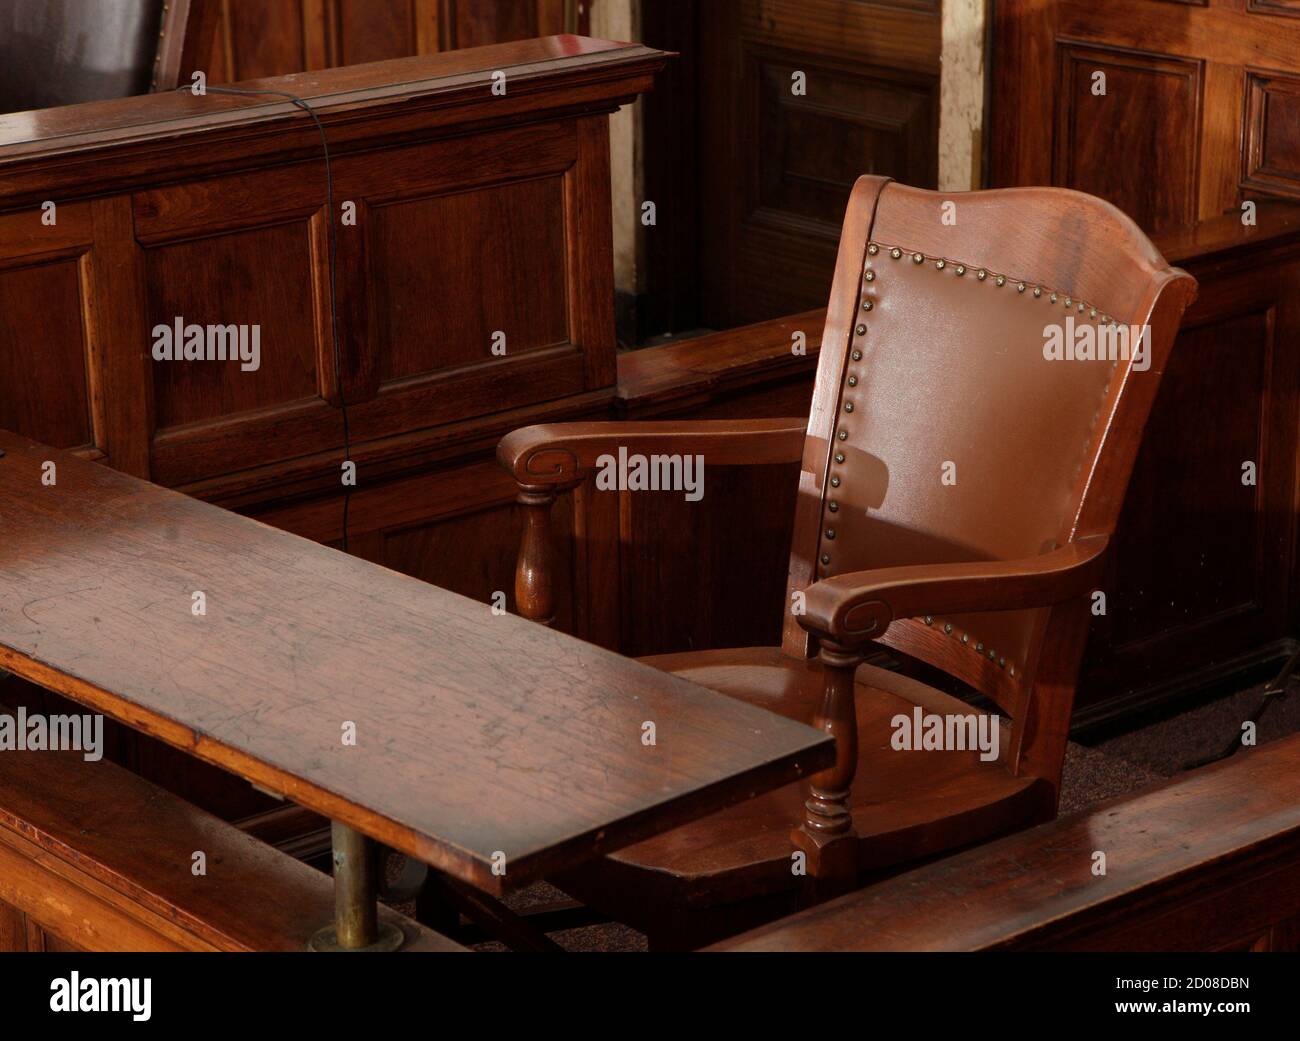 Witness Stand In Court High Resolution Stock Photography And Images Alamy